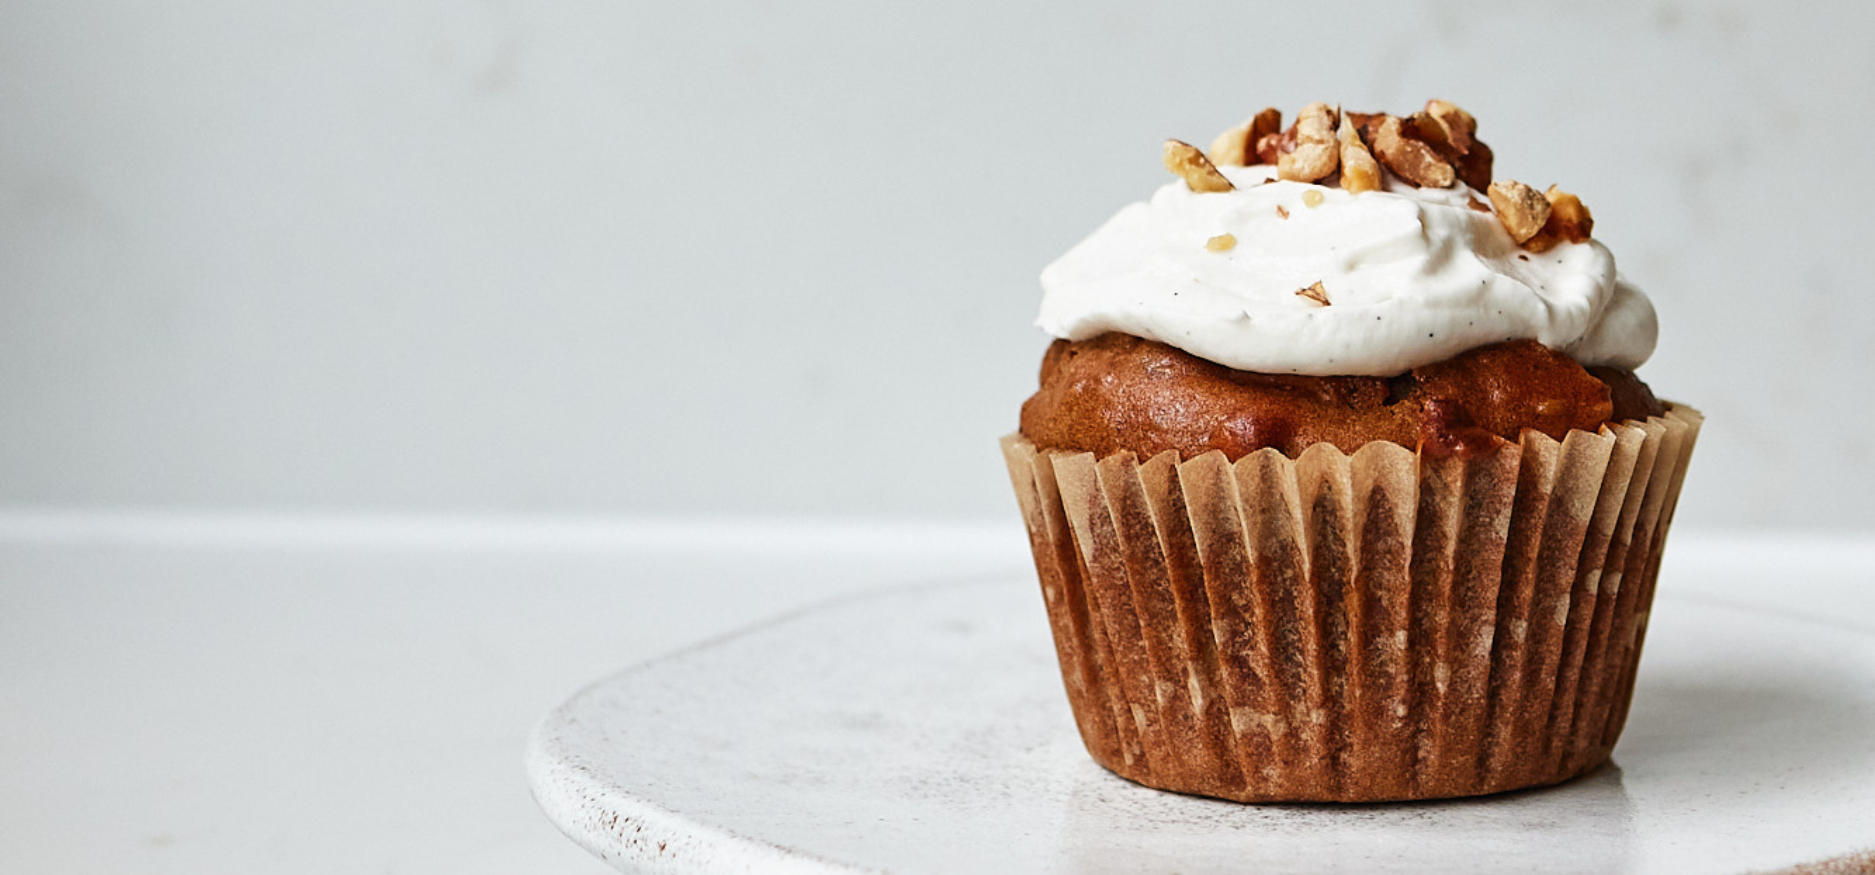 A single carrot cupcake with a coconut yoghurt and maple syrup topping with chopped nuts